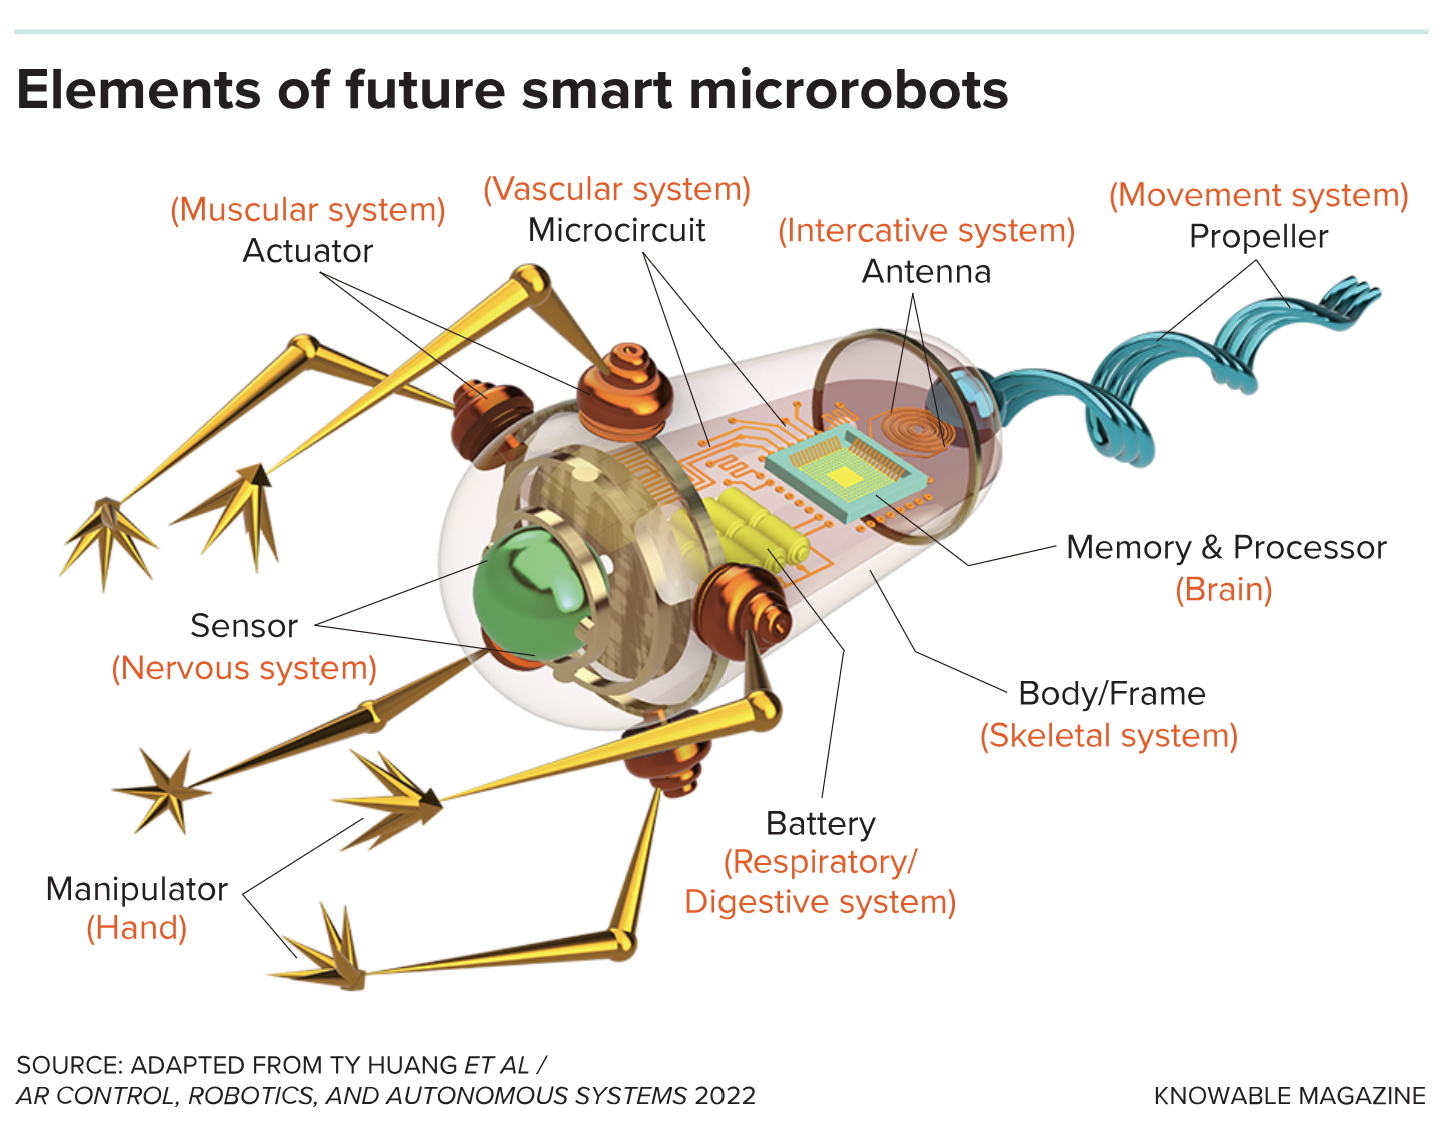 Illustration of a future vascular microrobot with labeled parts: sensors, manipulator, actuator, microcircuit, interactive antenna, propeller, battery, skeleton, brain, and processor.